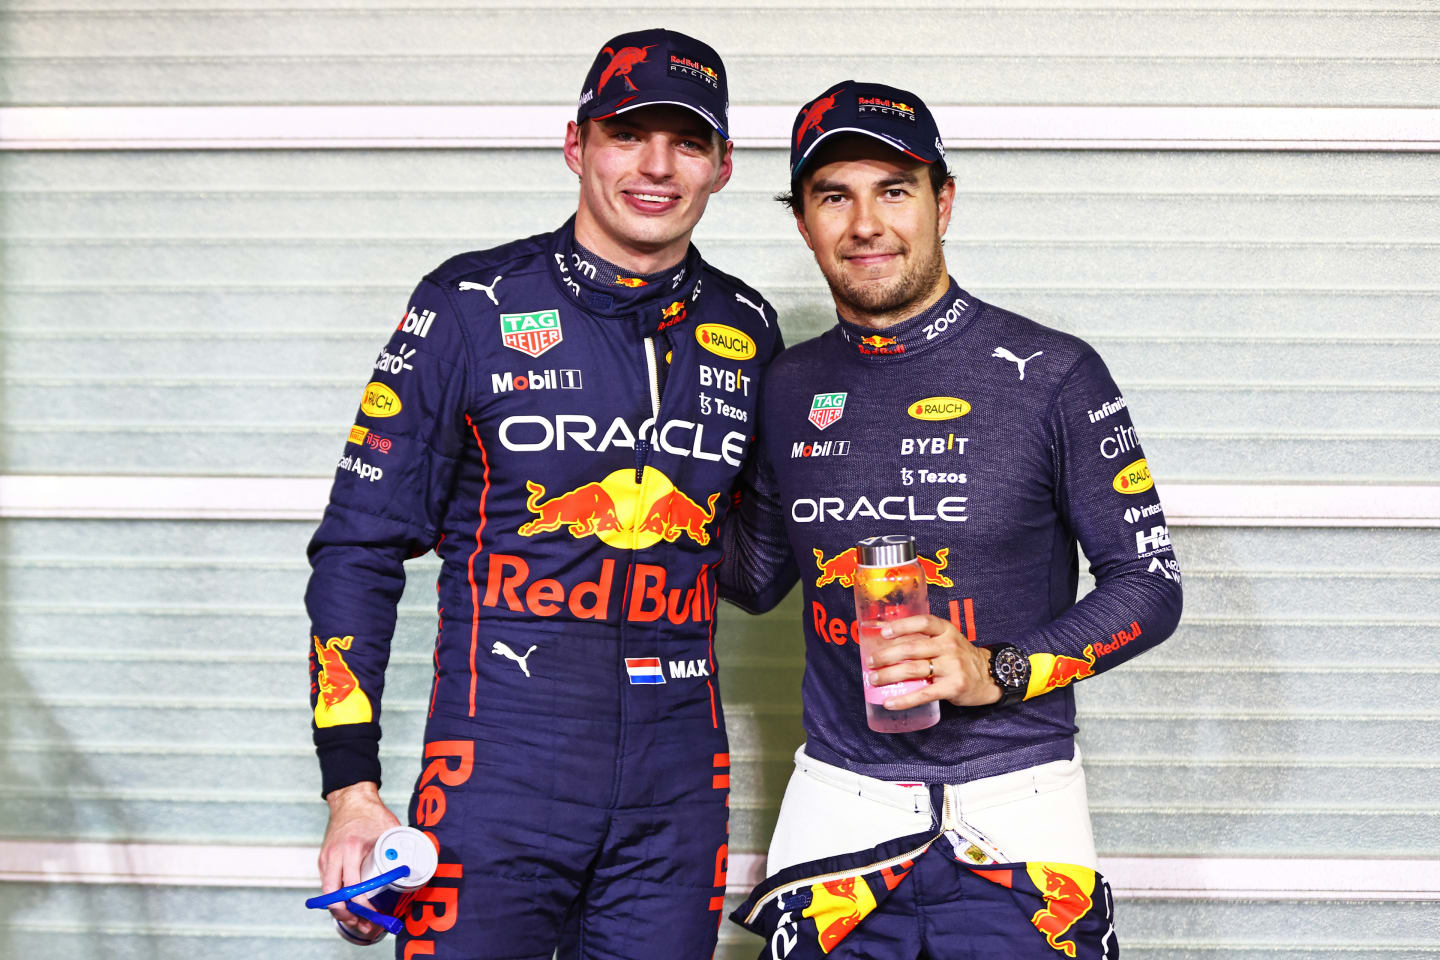 ABU DHABI, UNITED ARAB EMIRATES - NOVEMBER 19: Pole position qualifier Max Verstappen of the Netherlands and Oracle Red Bull Racing and Second placed qualifier Sergio Perez of Mexico and Oracle Red Bull Racing pose for a photo in parc ferme during qualifying ahead of the F1 Grand Prix of Abu Dhabi at Yas Marina Circuit on November 19, 2022 in Abu Dhabi, United Arab Emirates. (Photo by Mark Thompson/Getty Images)